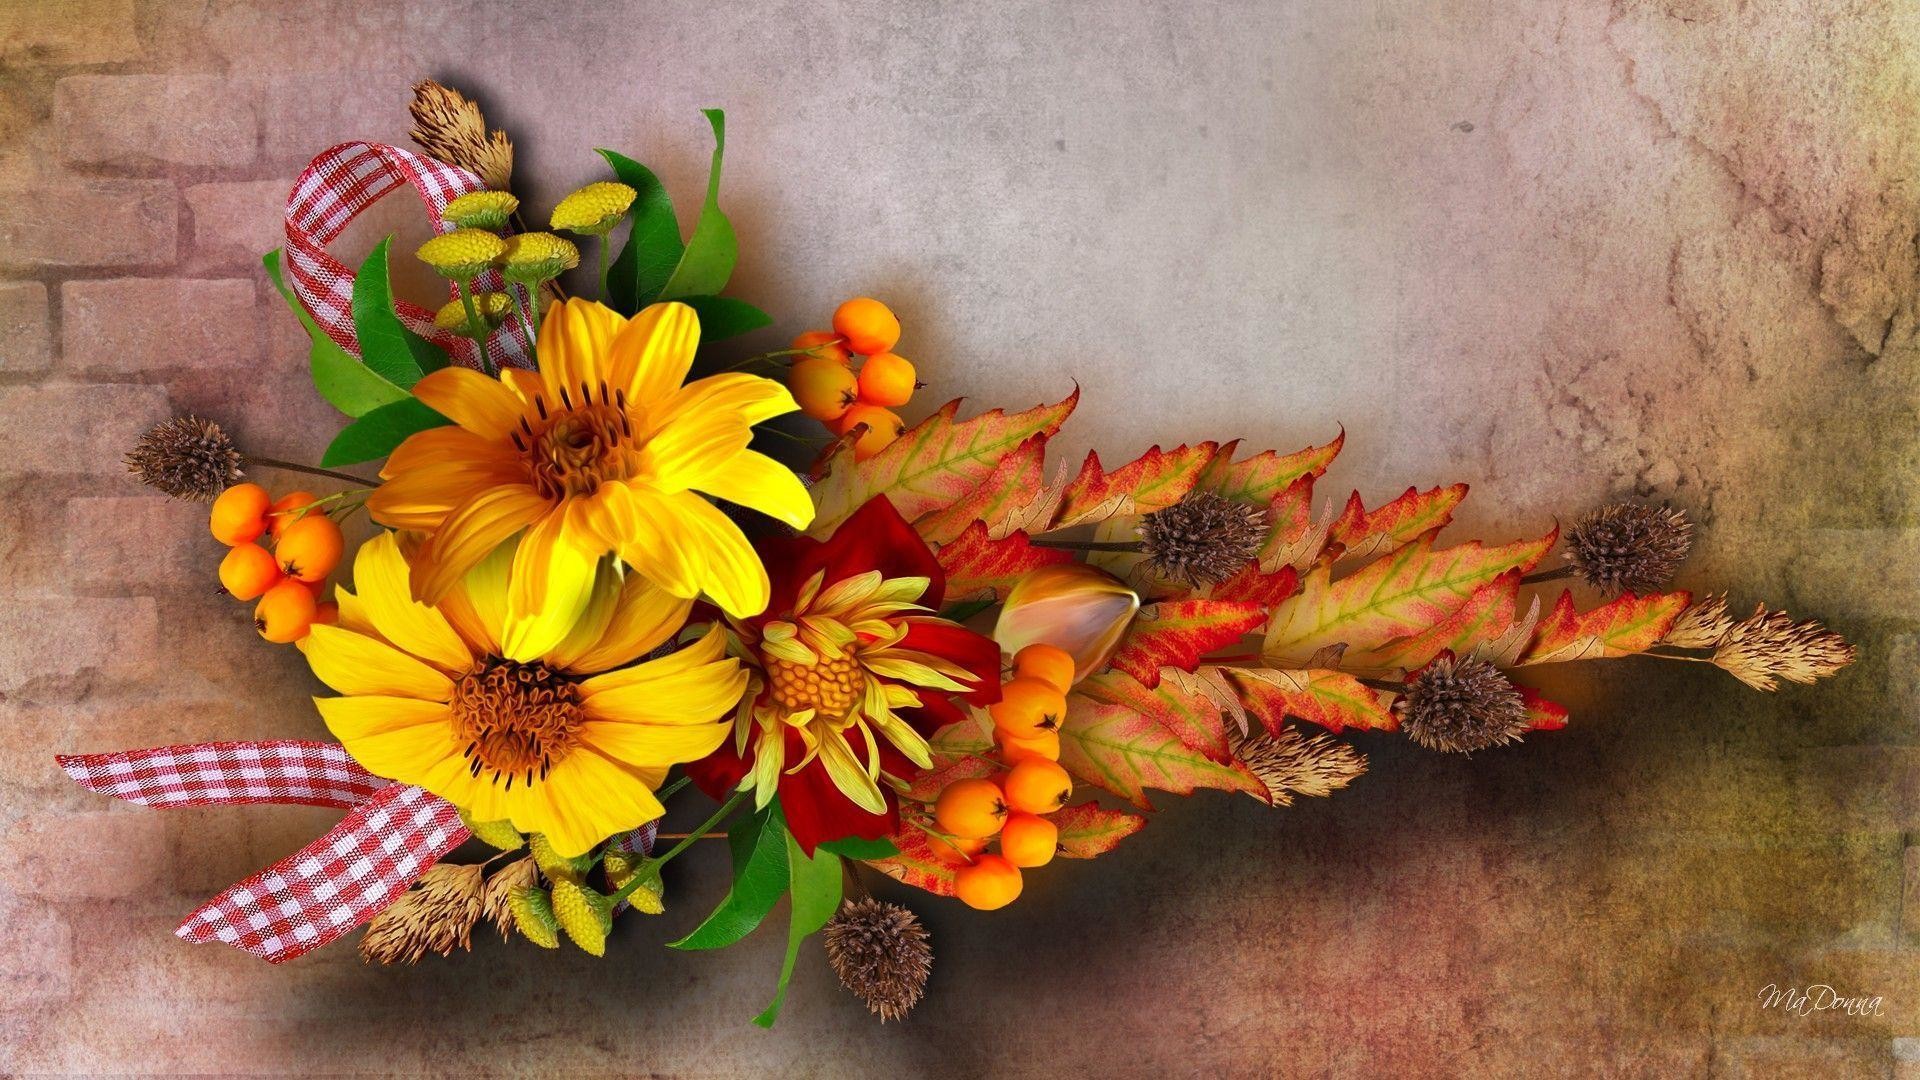 1920x1080 Wallpapers For > Fall Flowers And Pumpkins Wallpaper